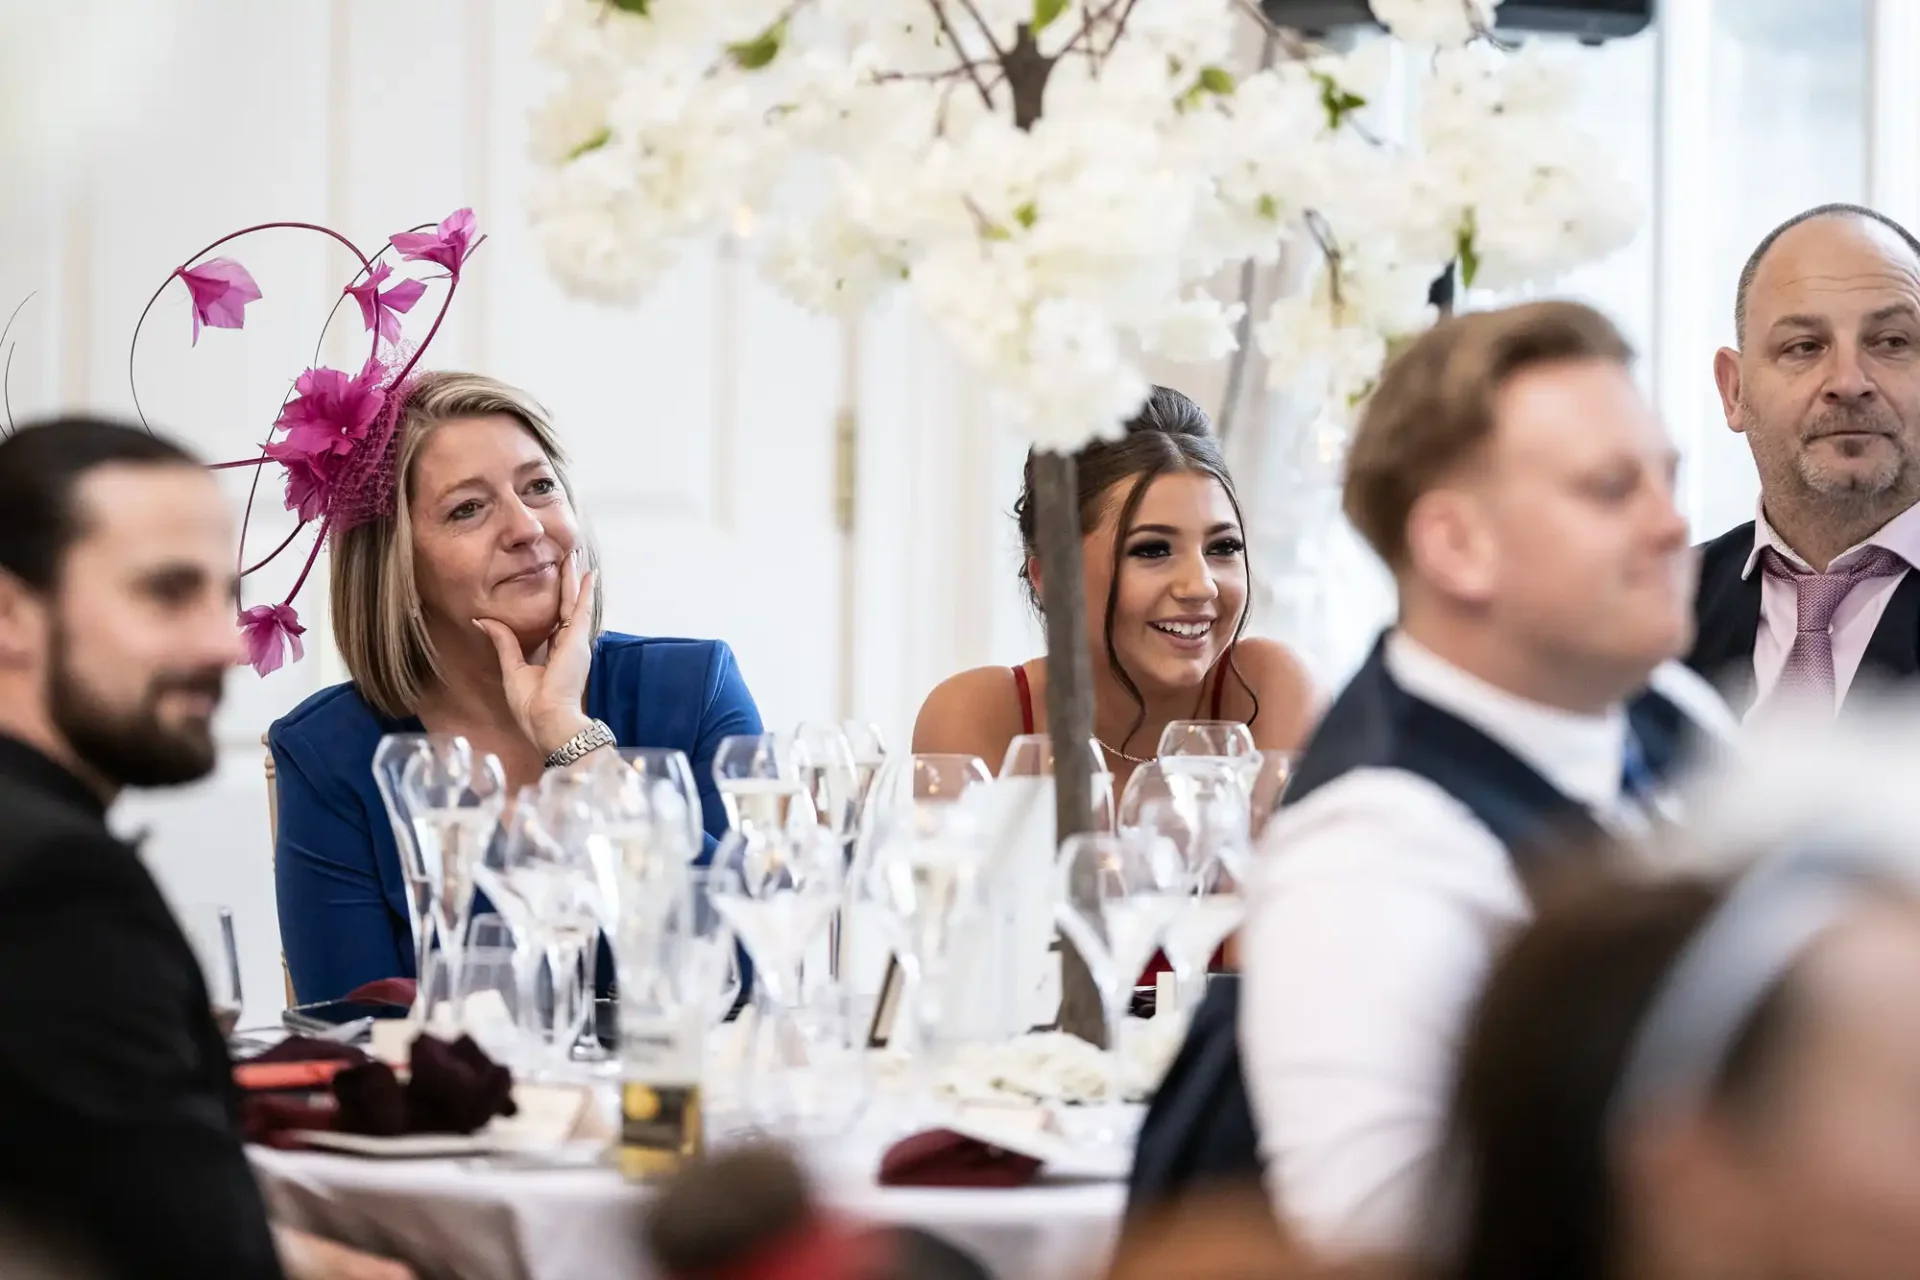 Guests at a wedding reception are seated at a table adorned with tall white floral centerpieces, with one woman wearing a striking pink fascinator.